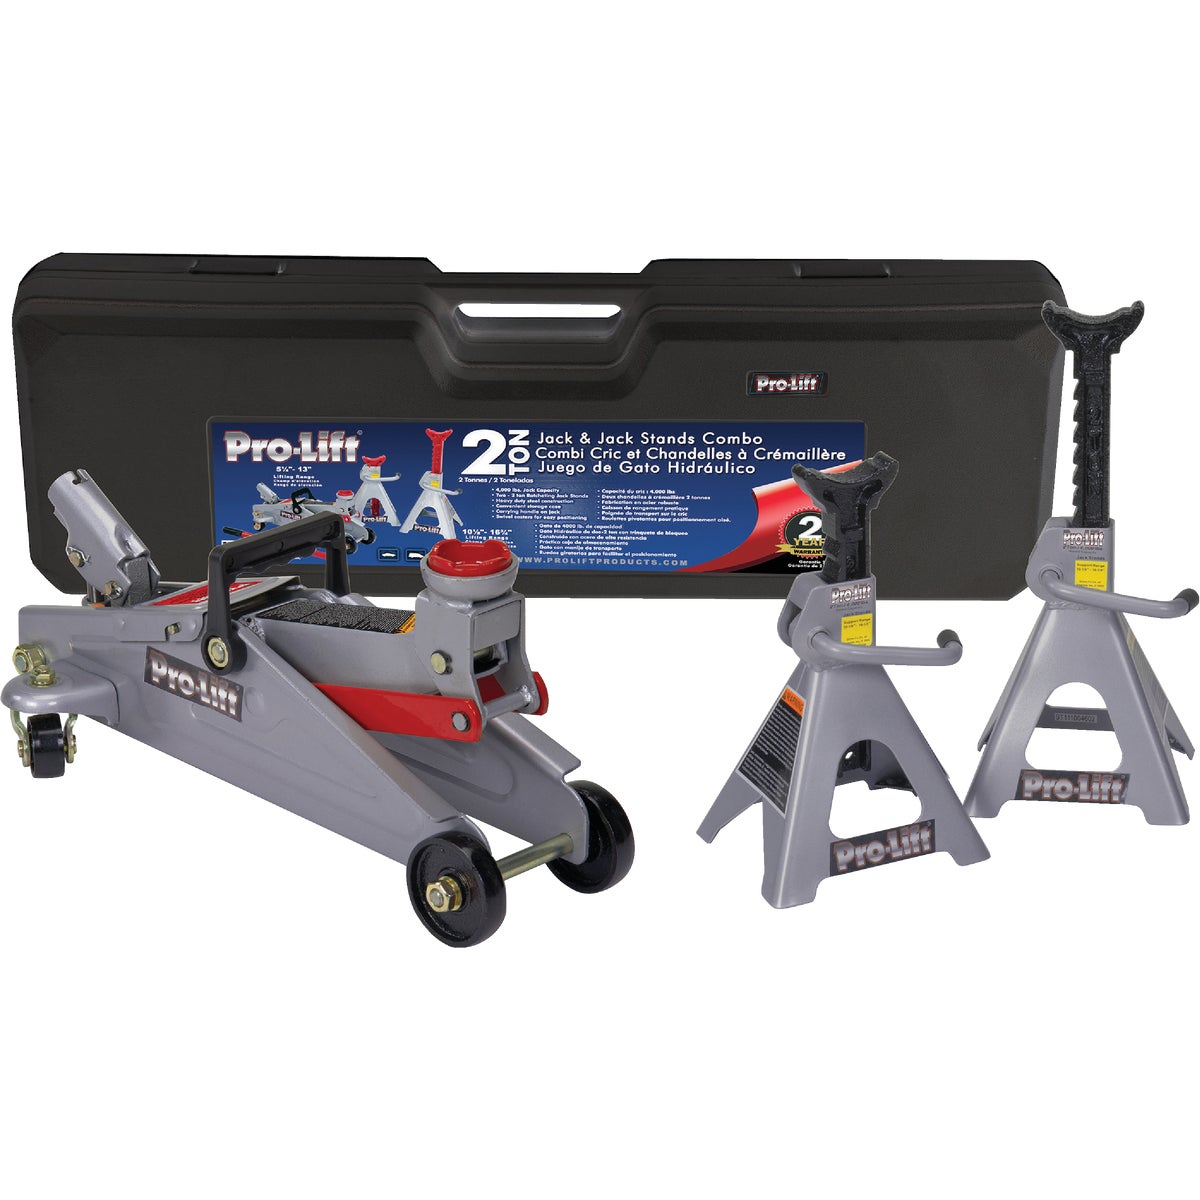 Pro-Lift 2-Ton Service Floor Jack with Jack Stands